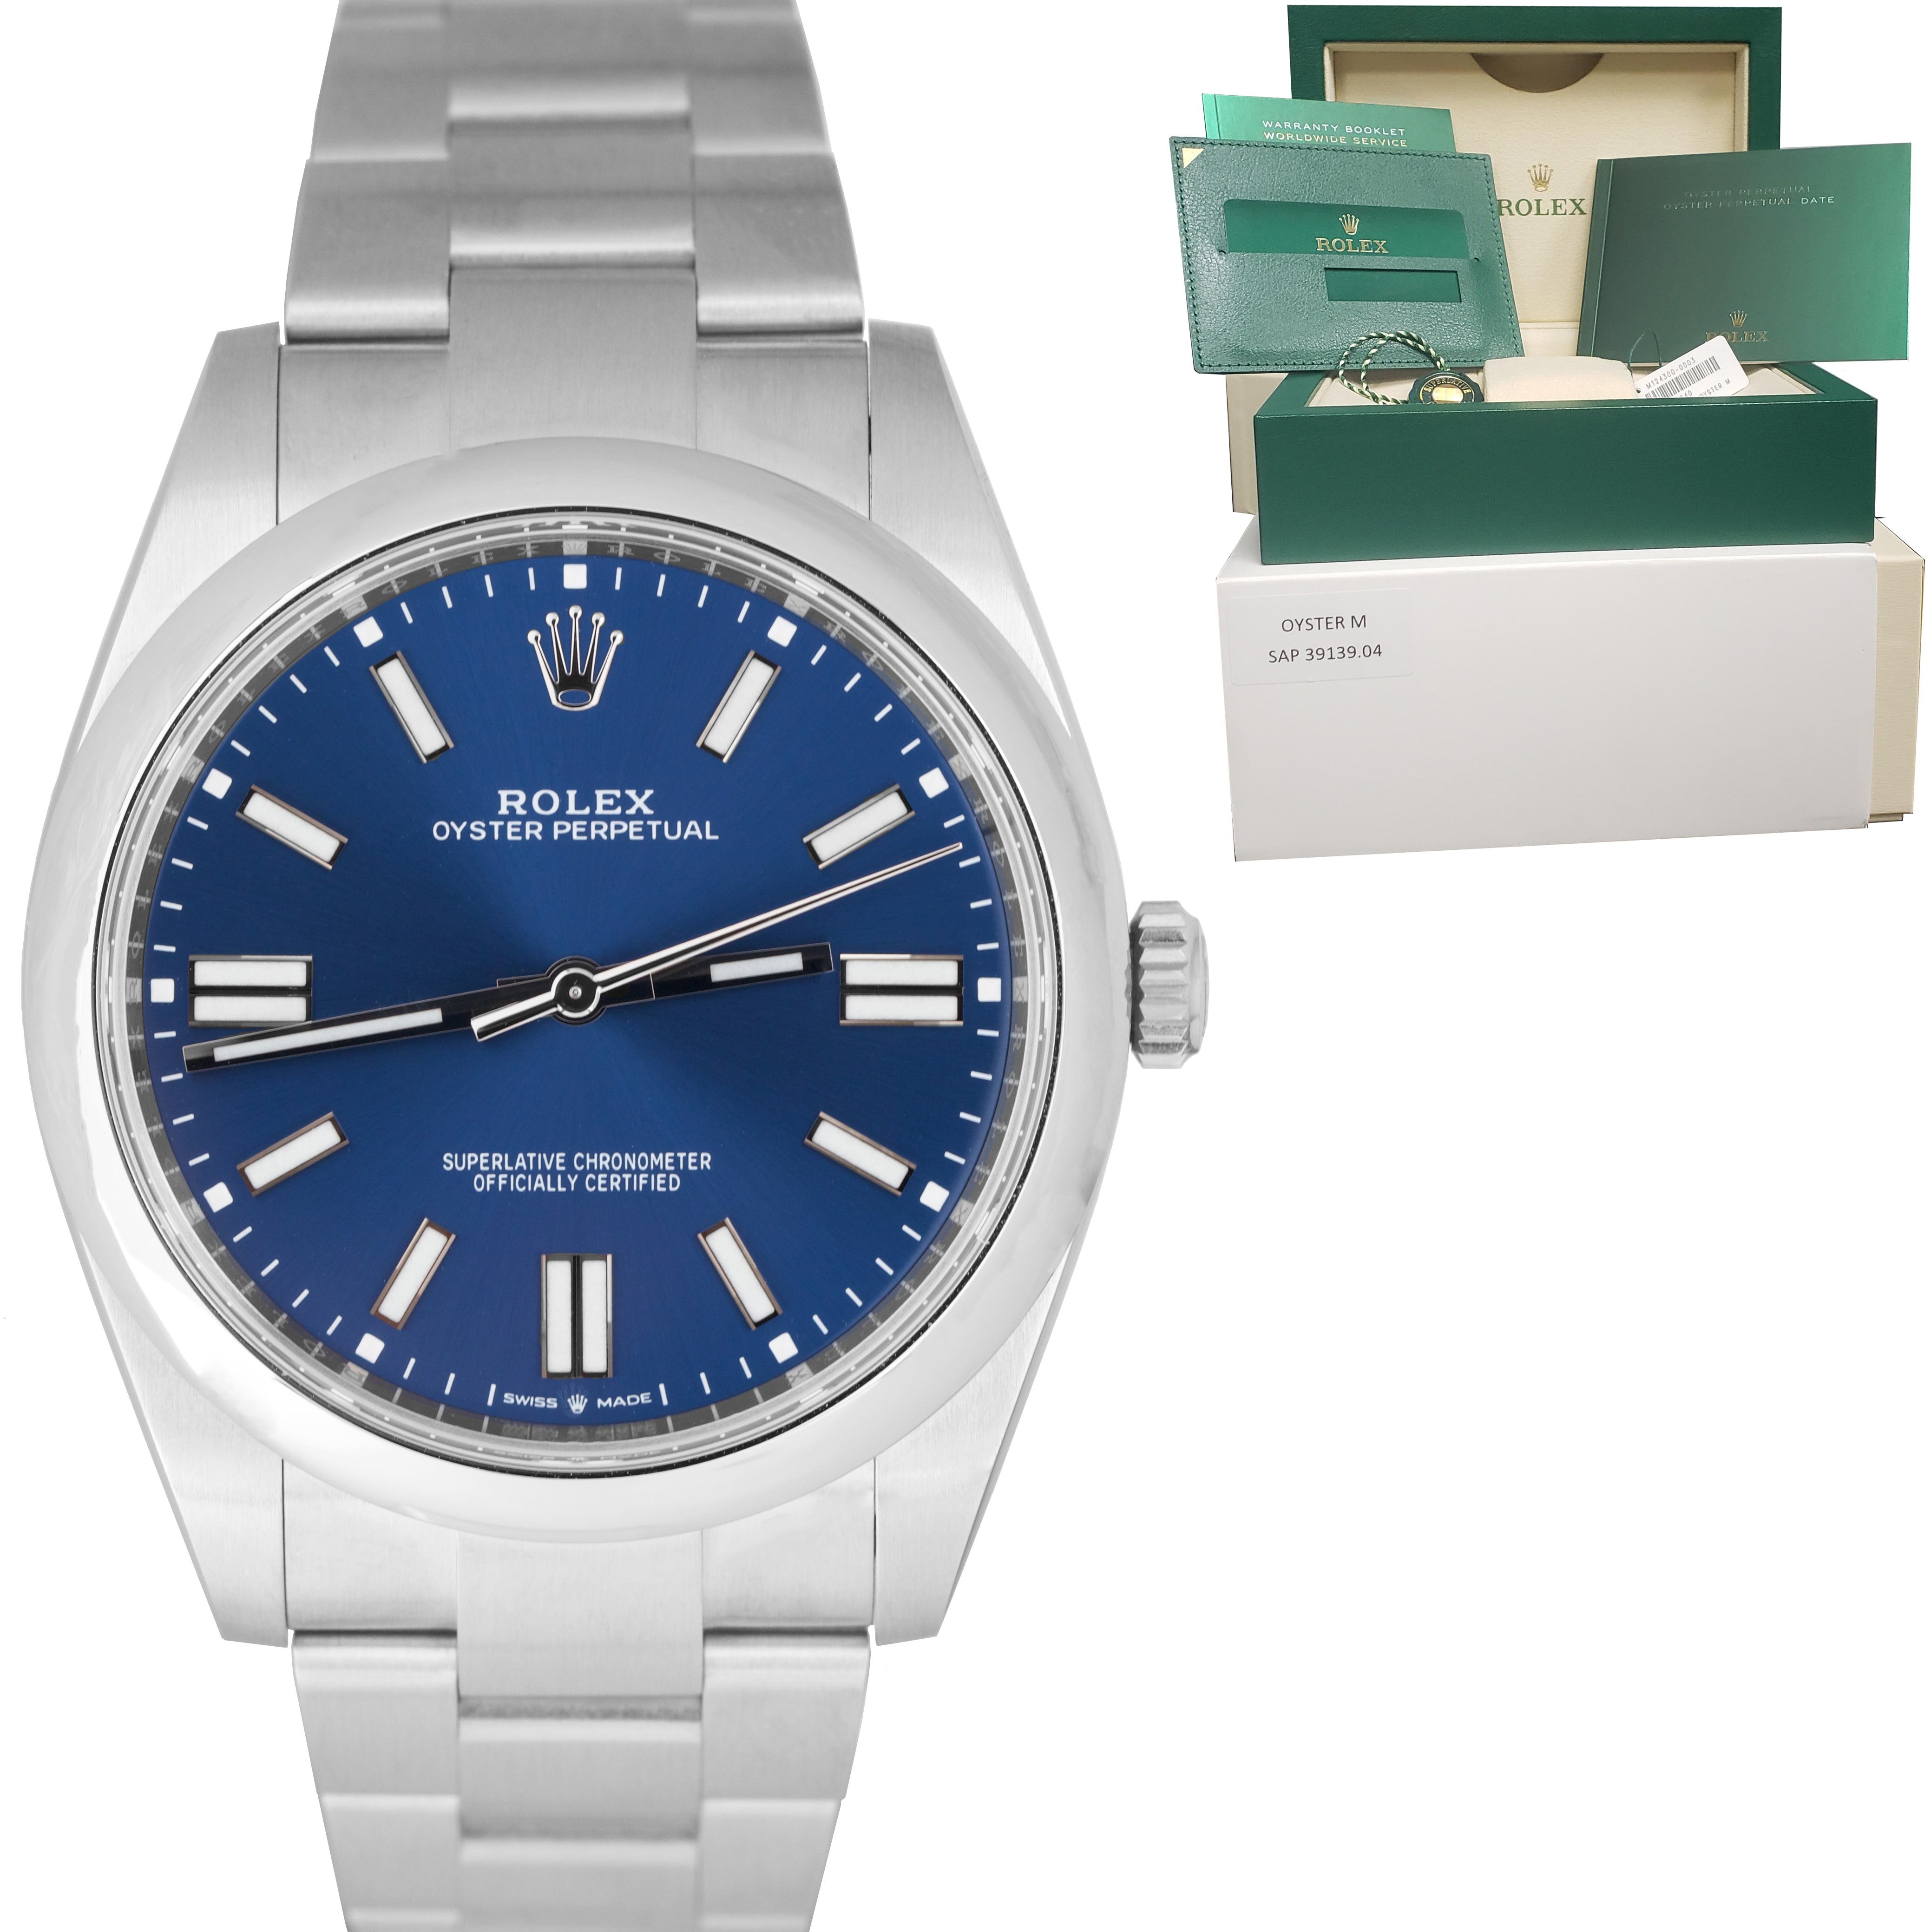 BRAND NEW 2020 Rolex Oyster Perpetual 41mm BLUE Stainless Oyster Watch 124300